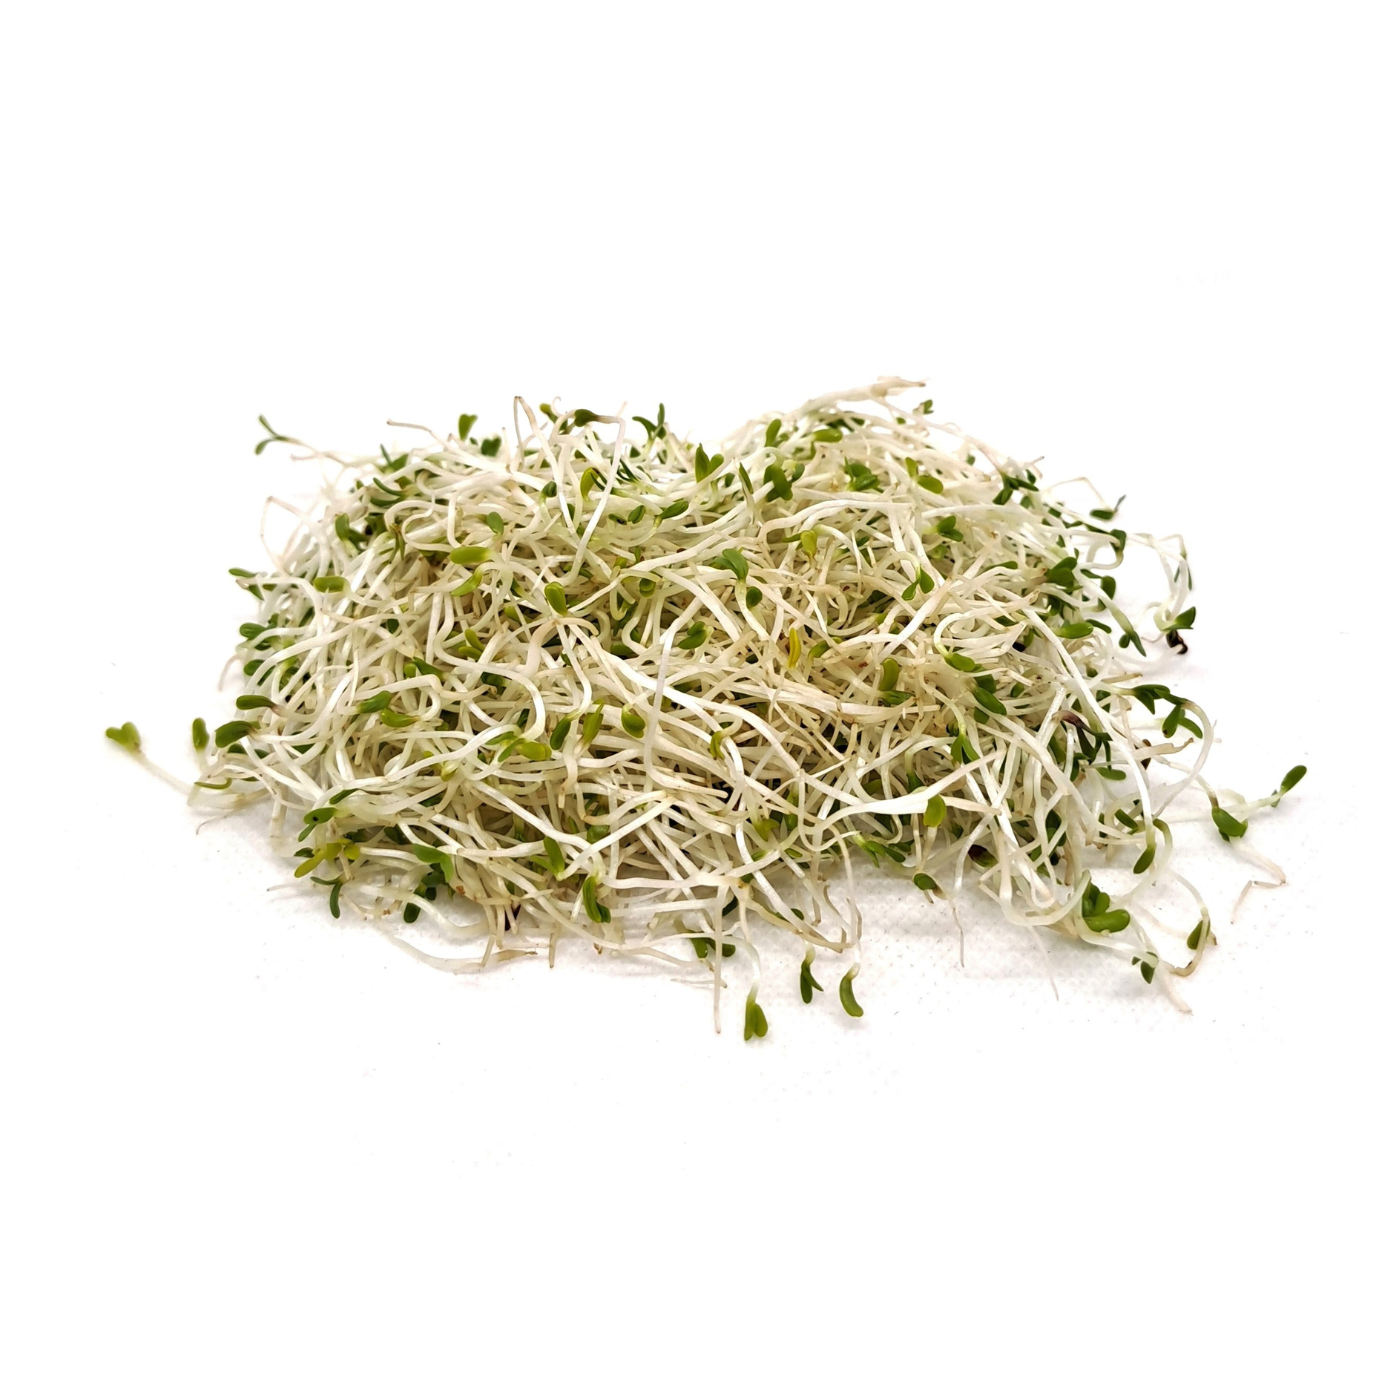 Organic Rocket sprouts